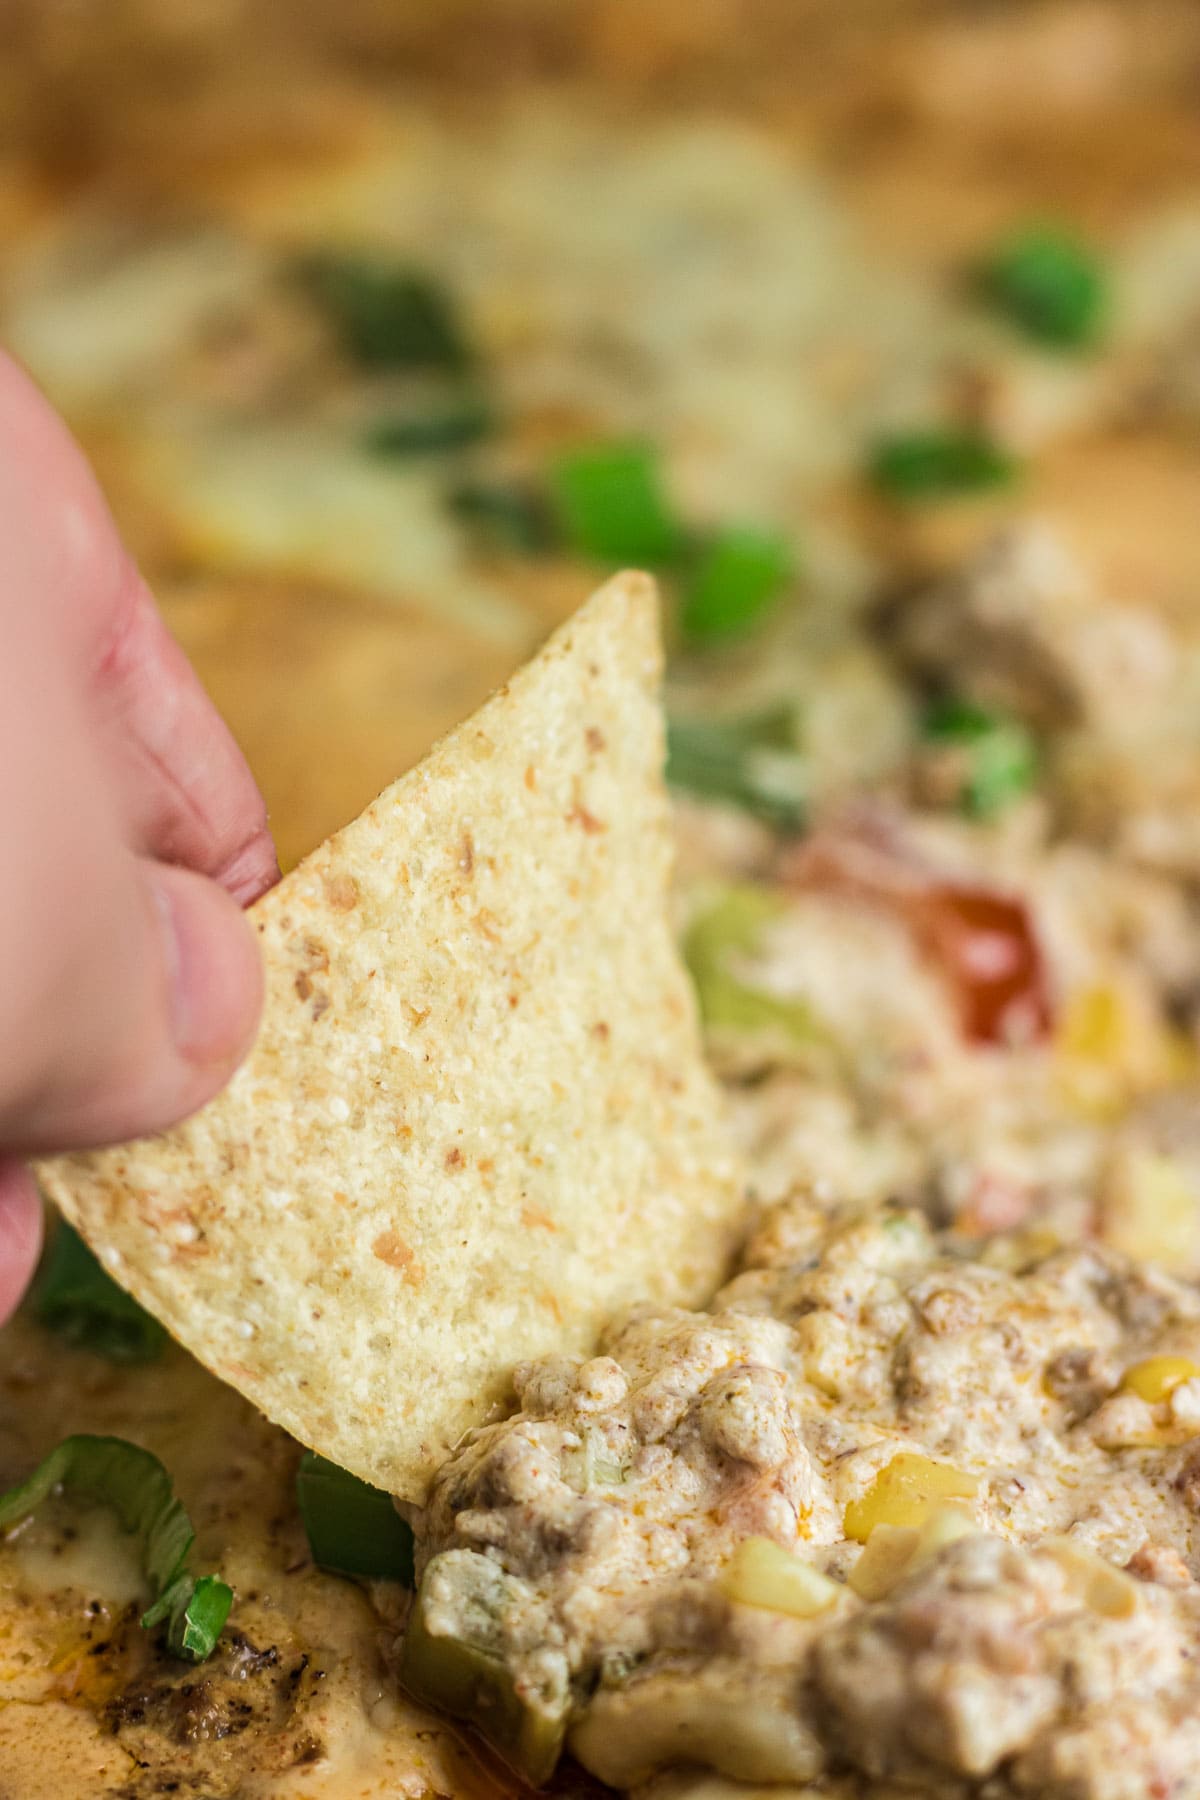 A tortilla chip being dipped into the cowboy dip.